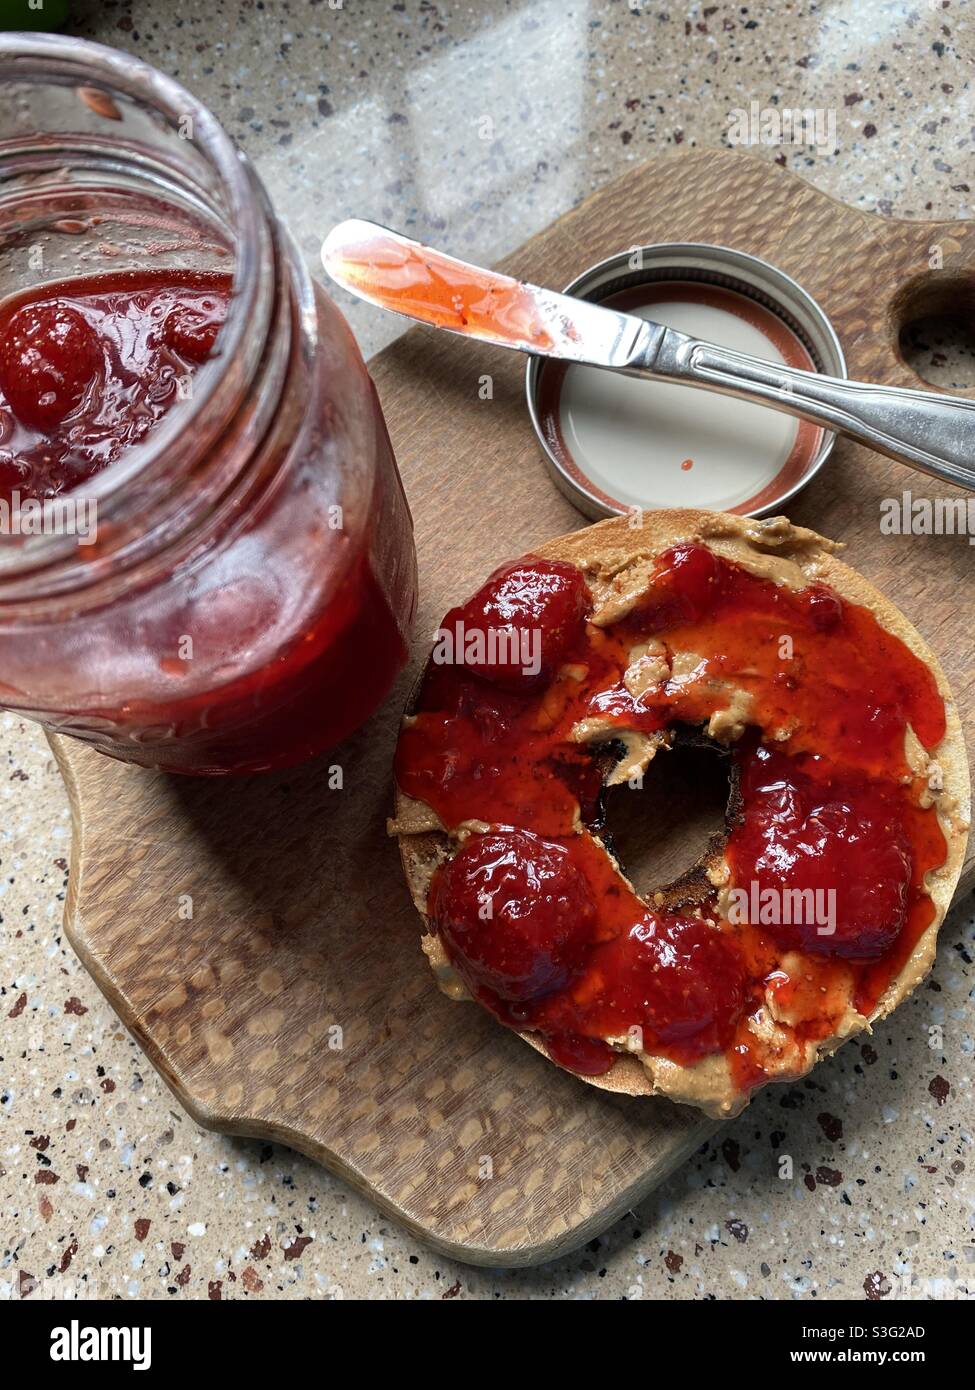 Homemade strawberry jam with natural peanut butter on a toasted bagel. Stock Photo